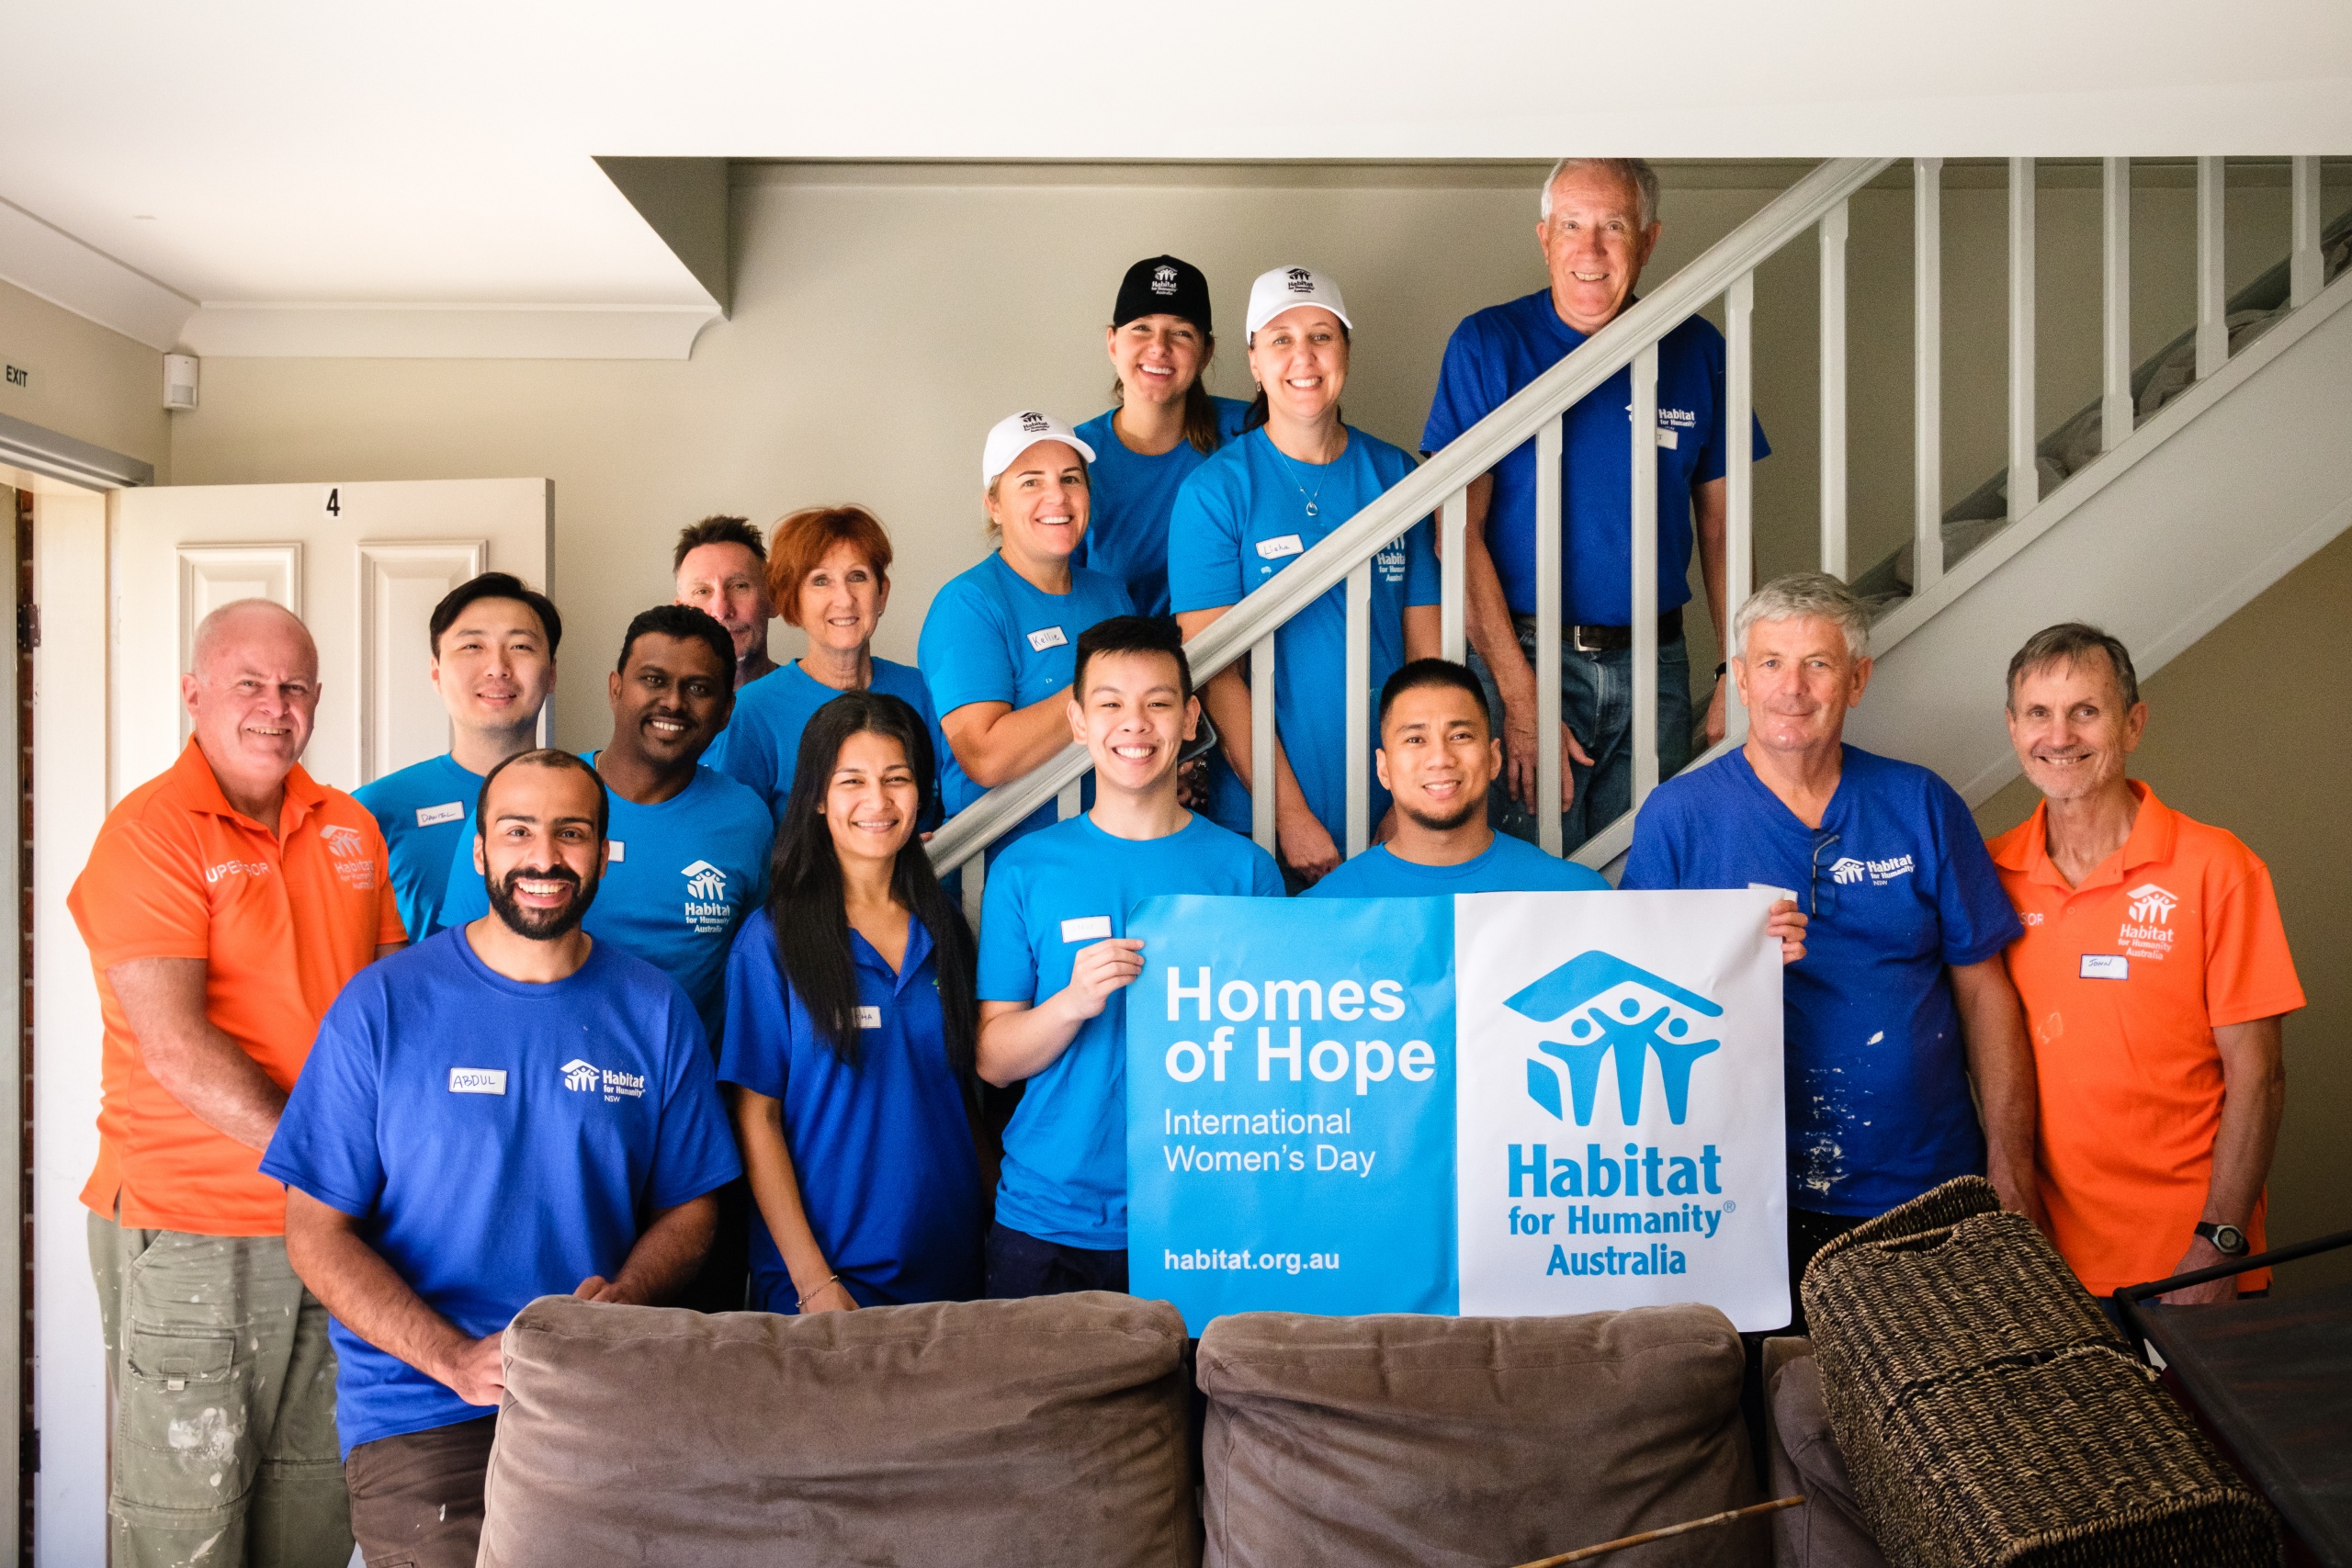 Habitat for Humanity Homes of Hope project completion group photo